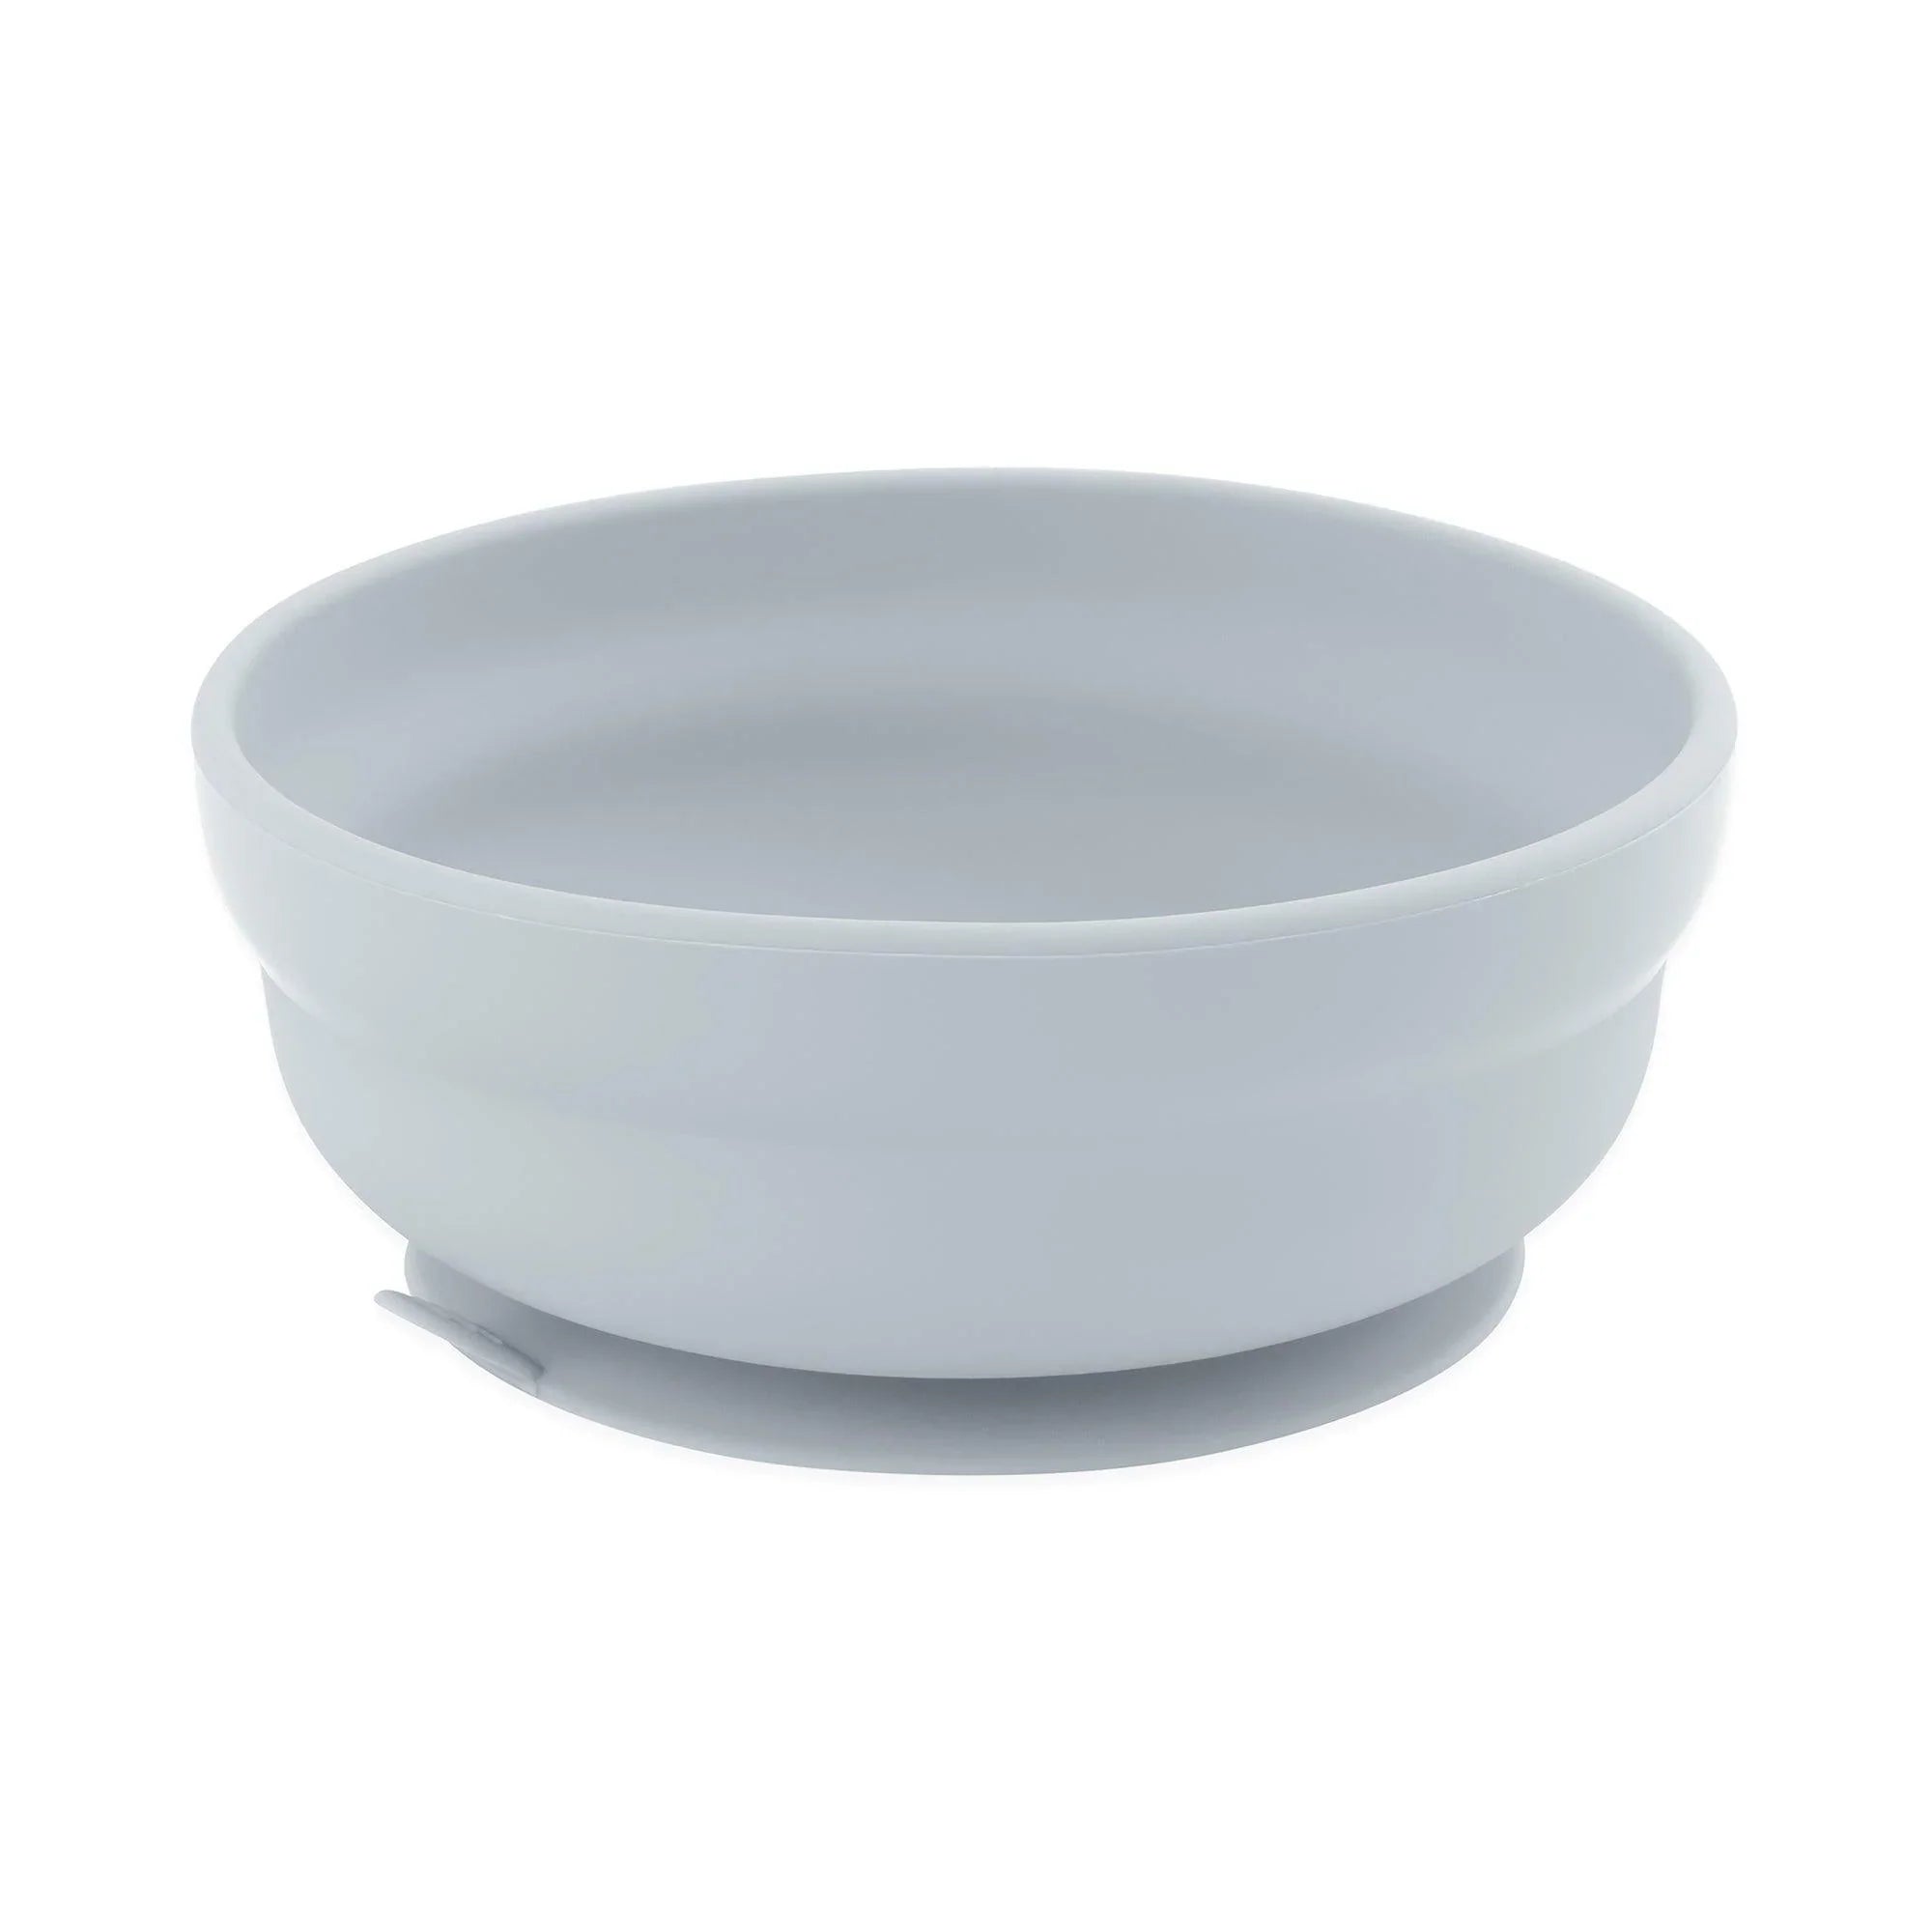 Goalfly 6 Pcs Silicone Mixing Bowls, 0.27 QT Non Stick Silicone Bowl,  Chocolate Melting Bowl, Mixing Bowls are Suitable for Serving, Prepping,  White